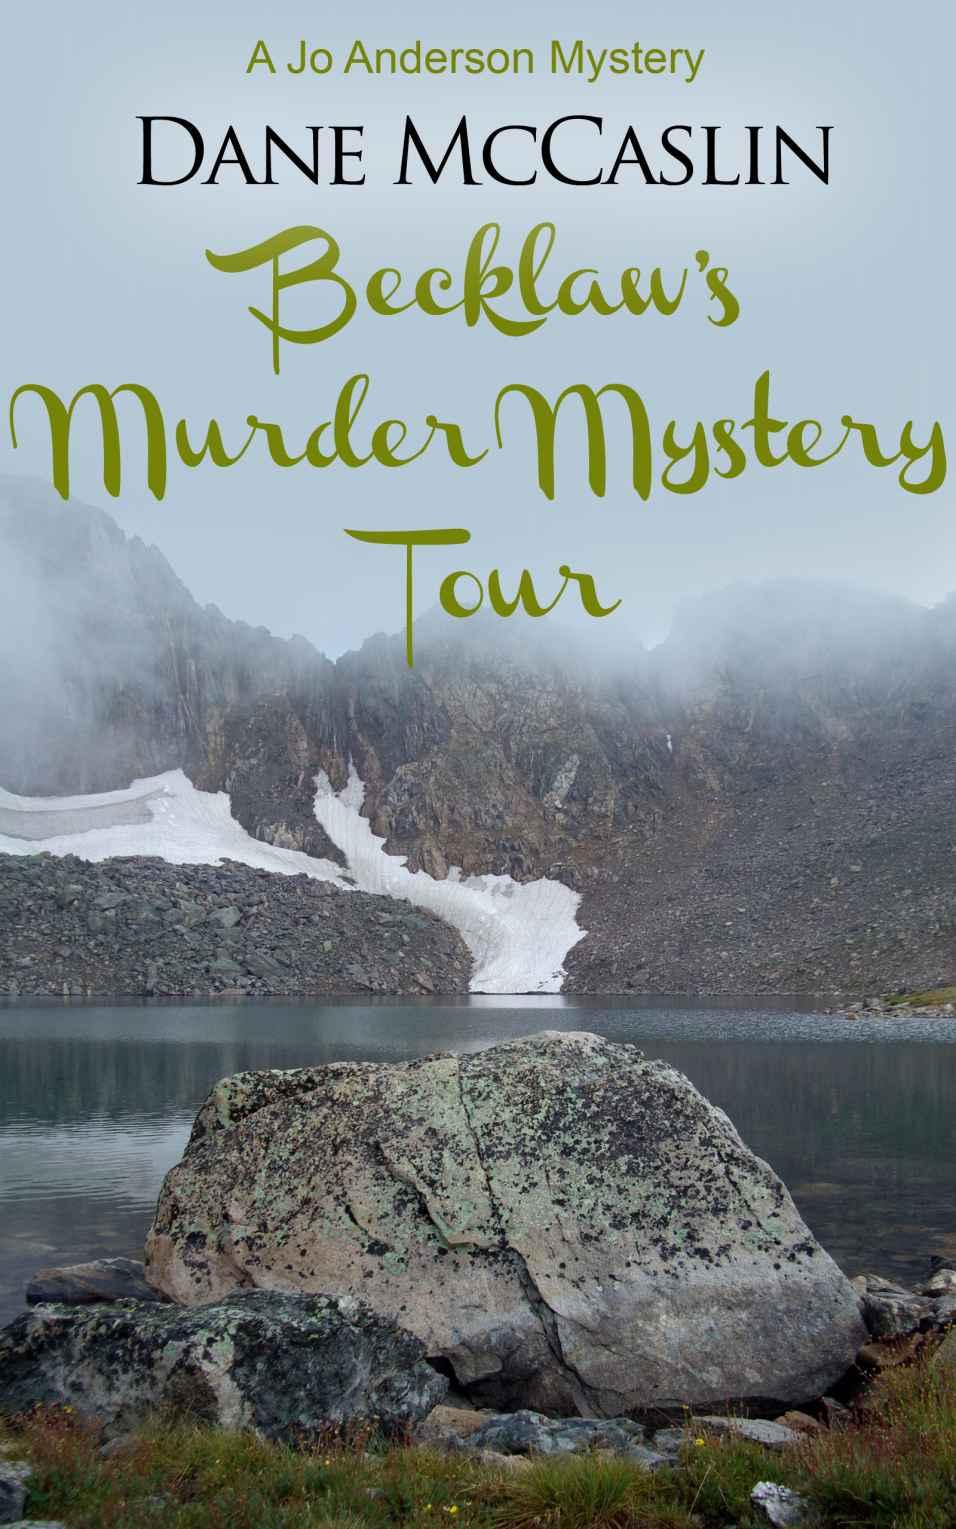 Becklaw's Murder Mystery Tour (Jo Anderson Series) by Dane McCaslin